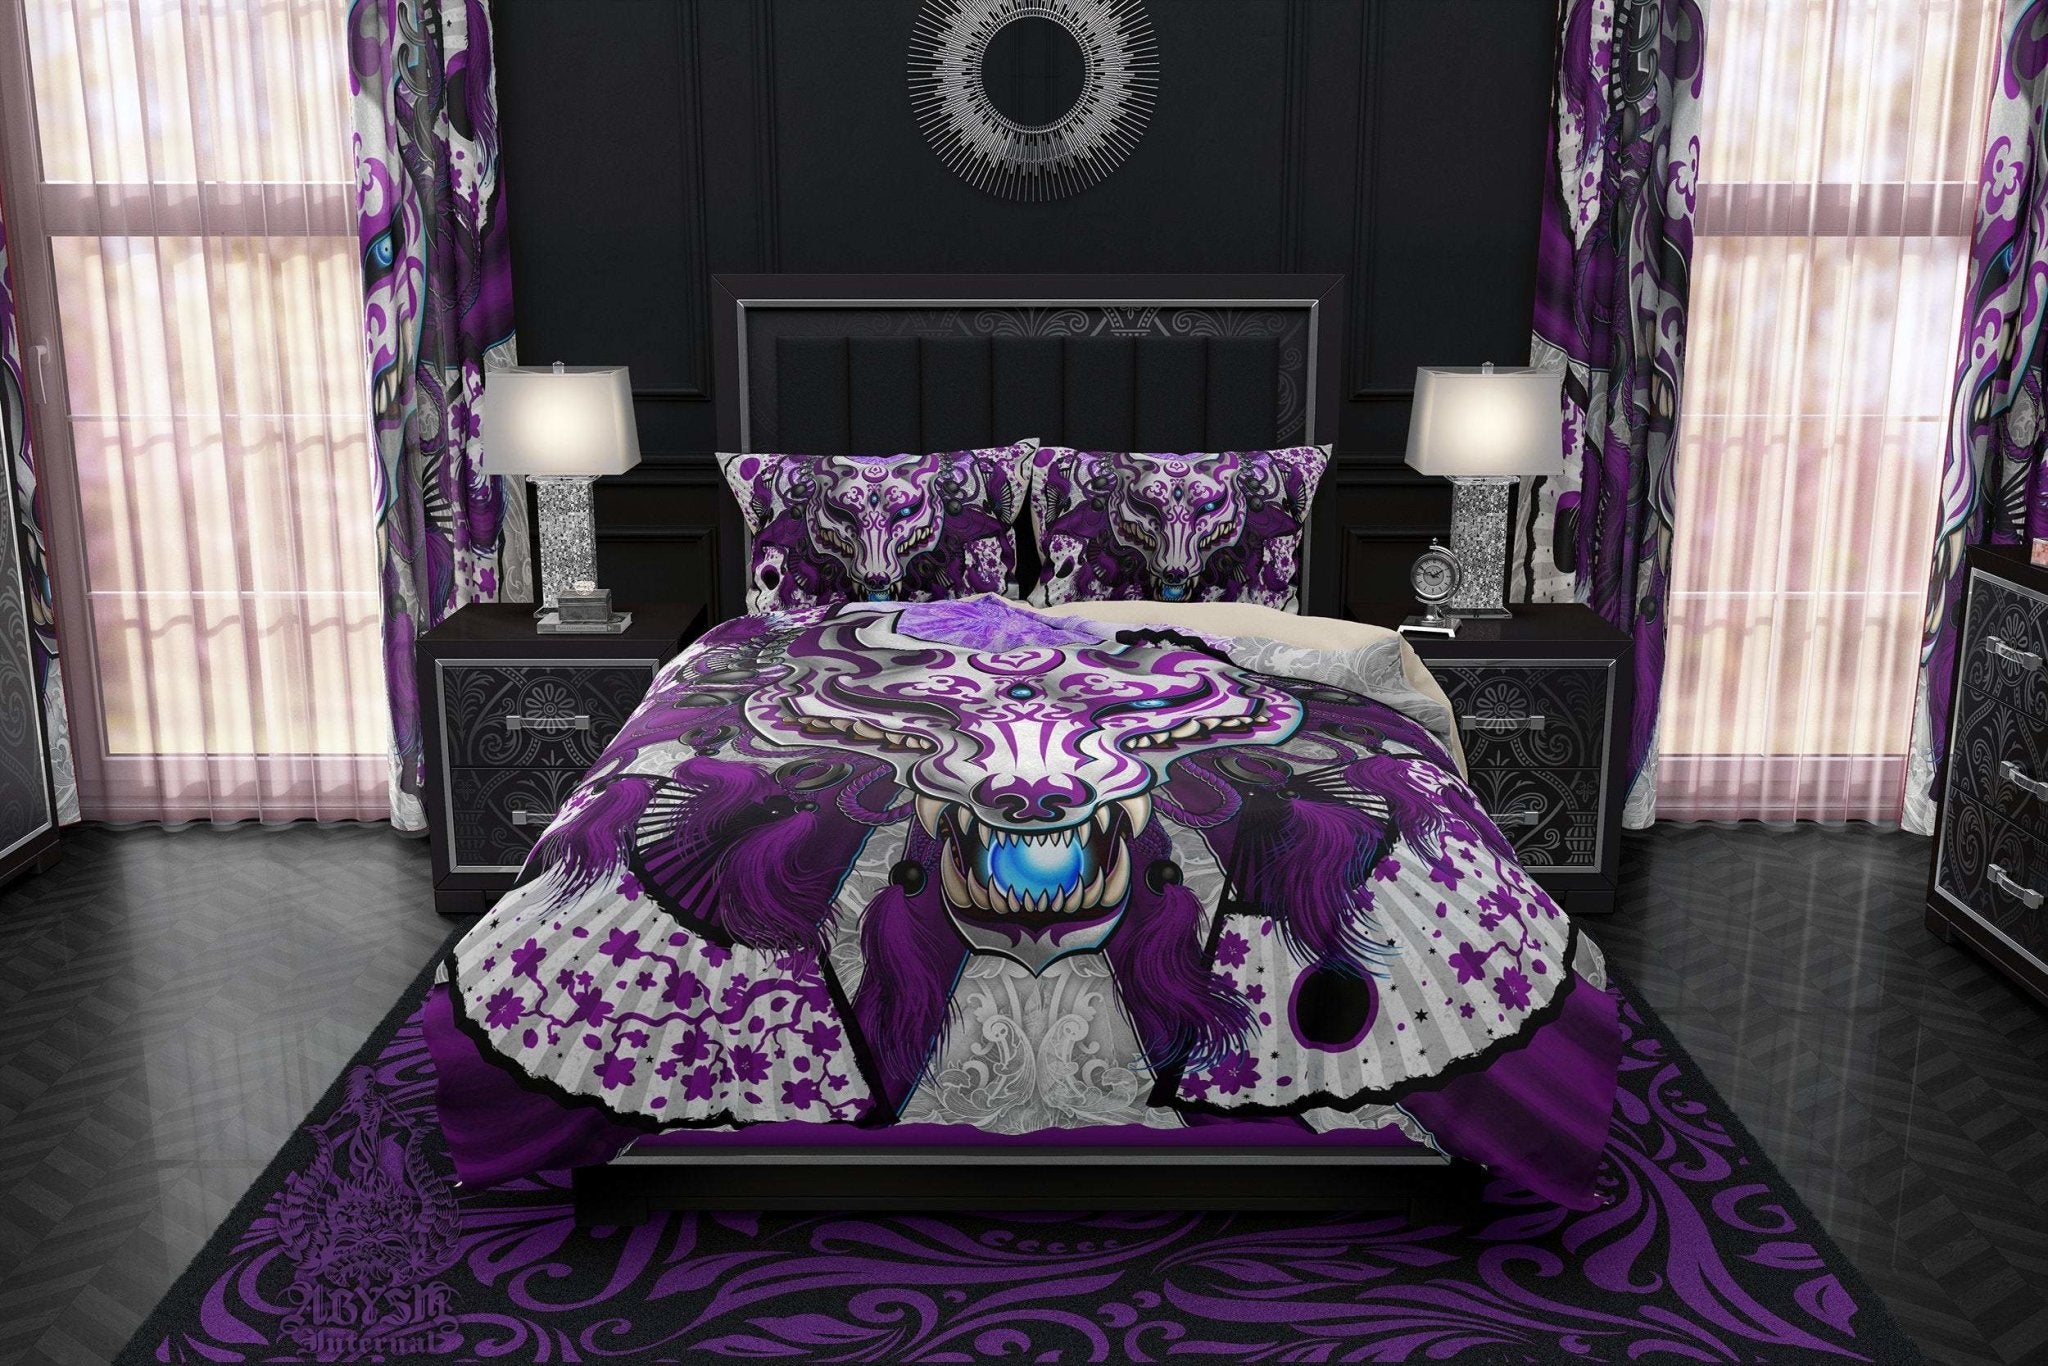 Pastel Goth Kitsune Mask Bedding Set, Comforter and Duvet, Fox Okami, Anime Bed Cover and Bedroom Decor, King, Queen and Twin Size - White, Purple - Abysm Internal